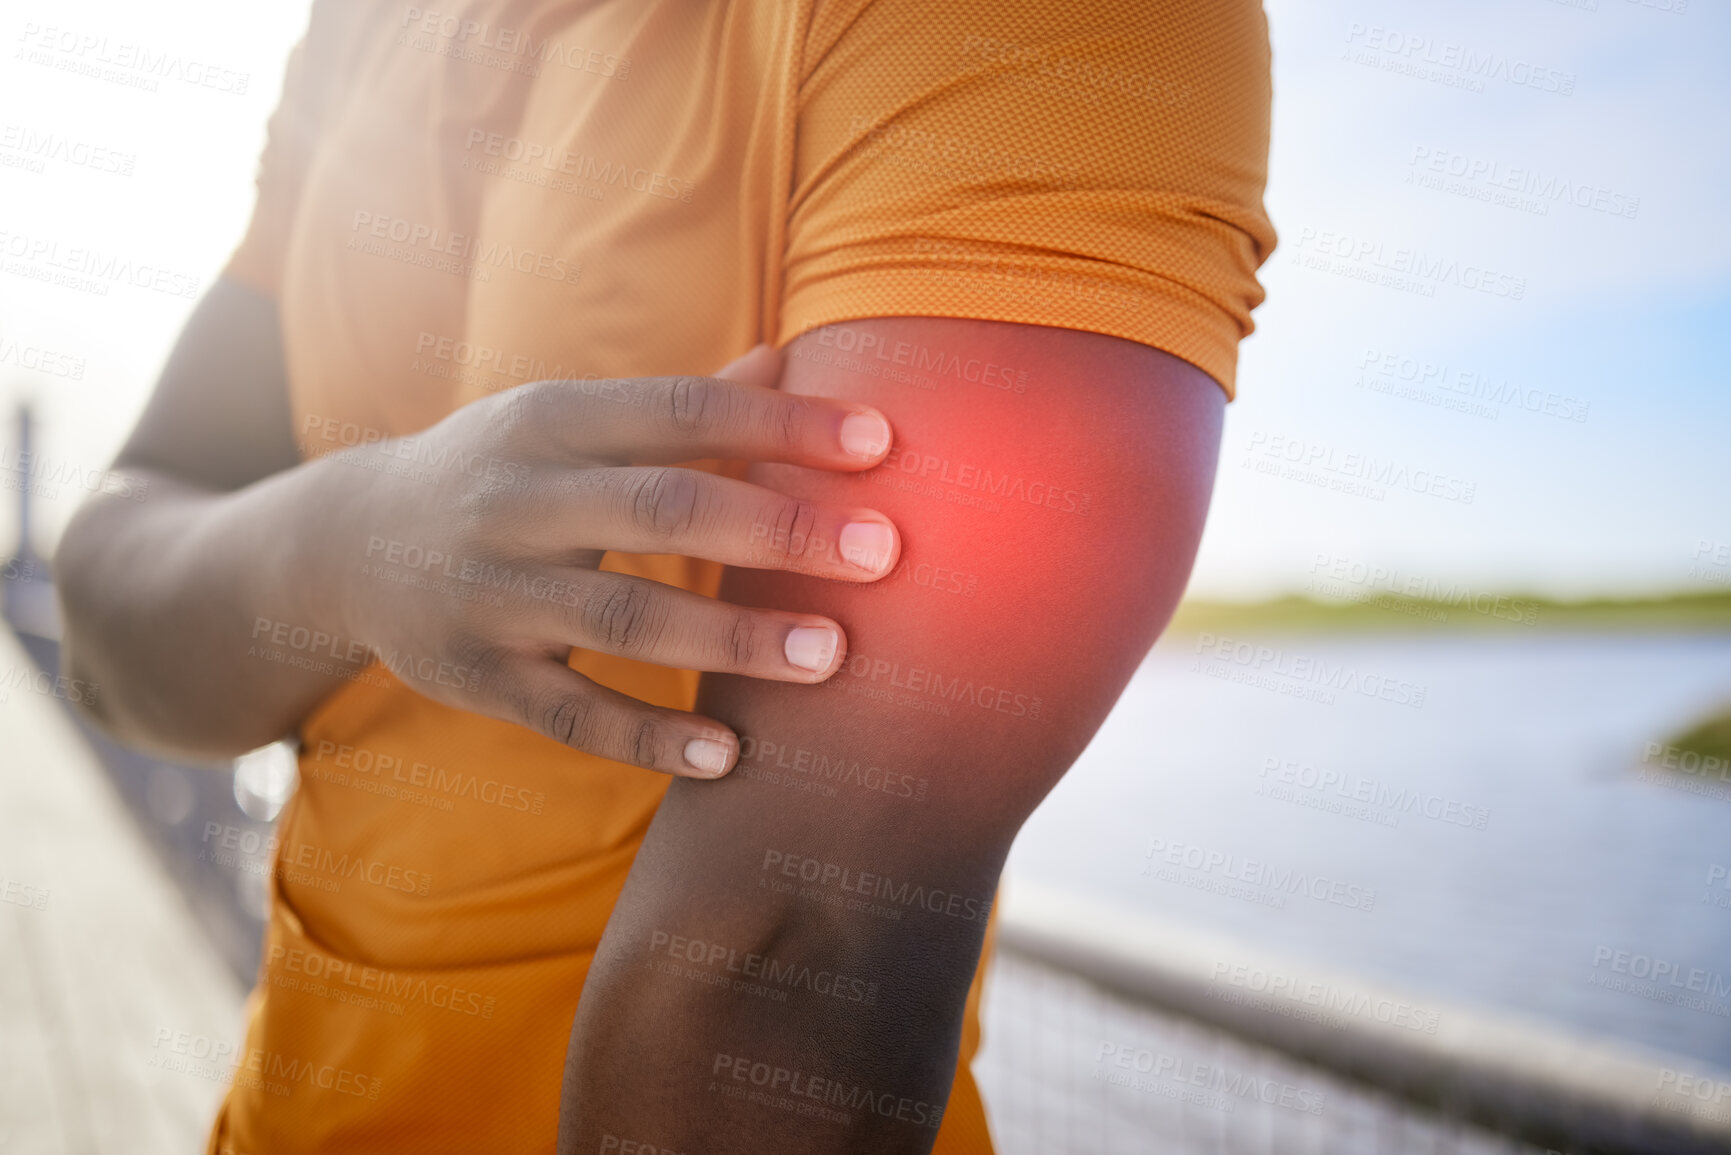 Buy stock photo A man with arm pain. A sporty and active African American man is touching his sore arm